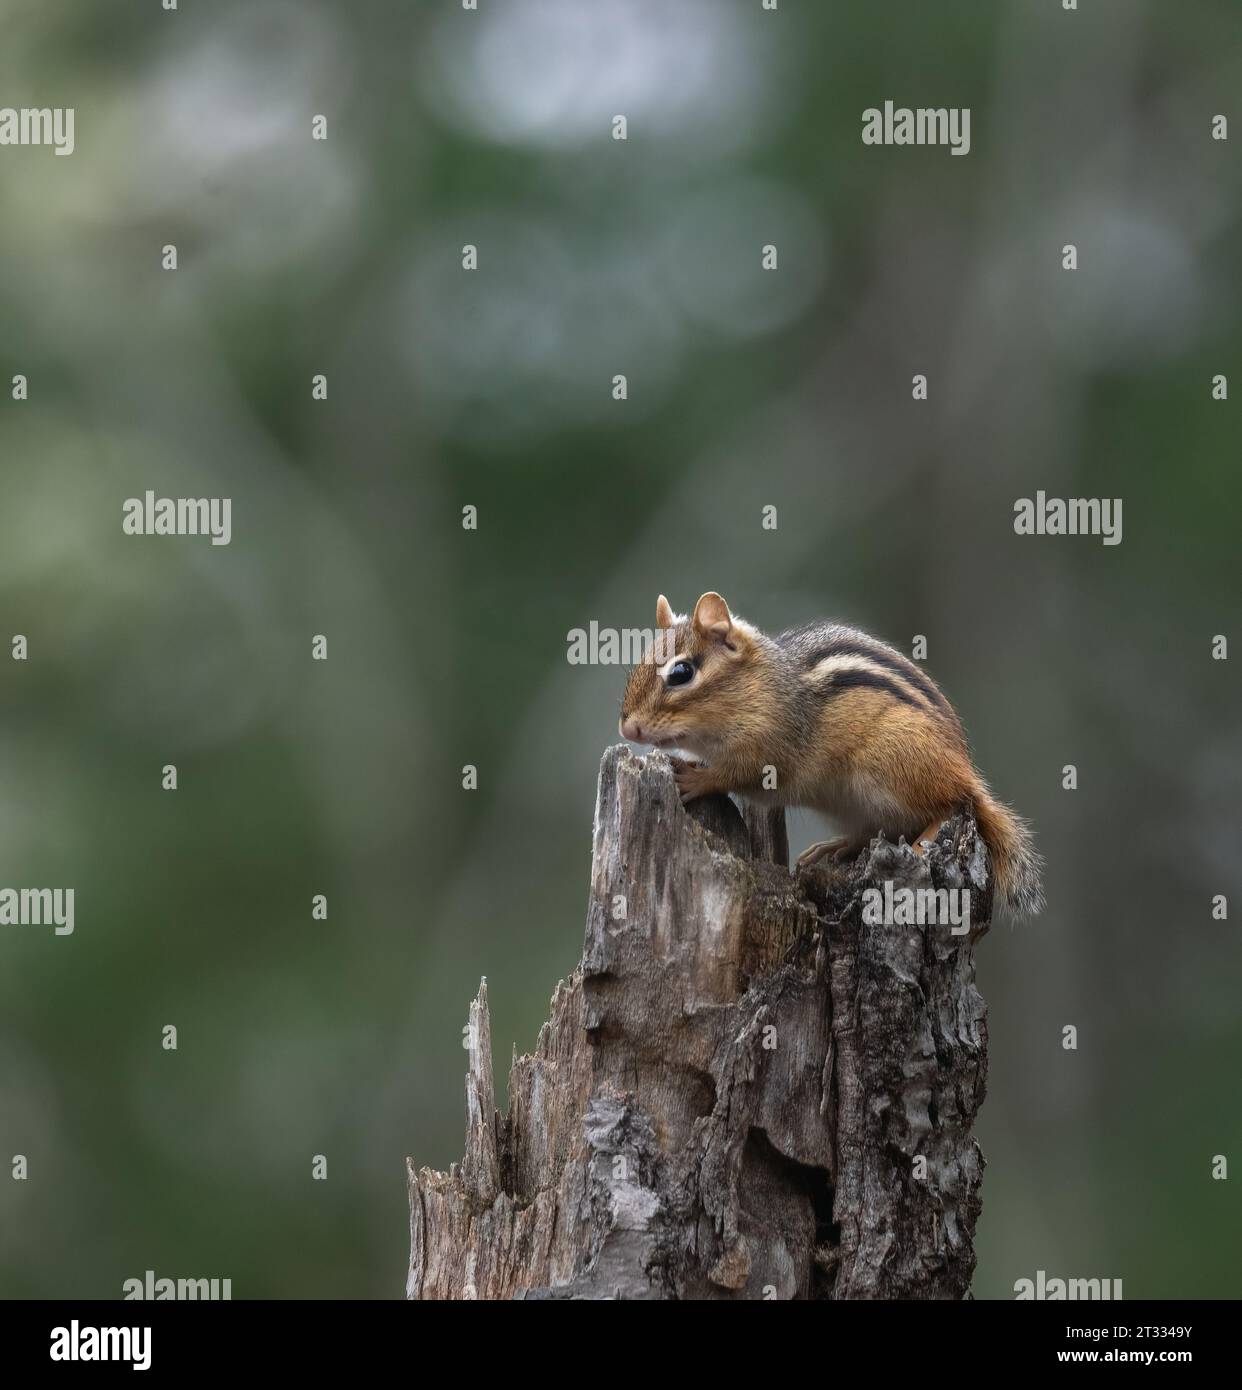 A little Eastern Chipmunk on a stump in a green forest Stock Photo